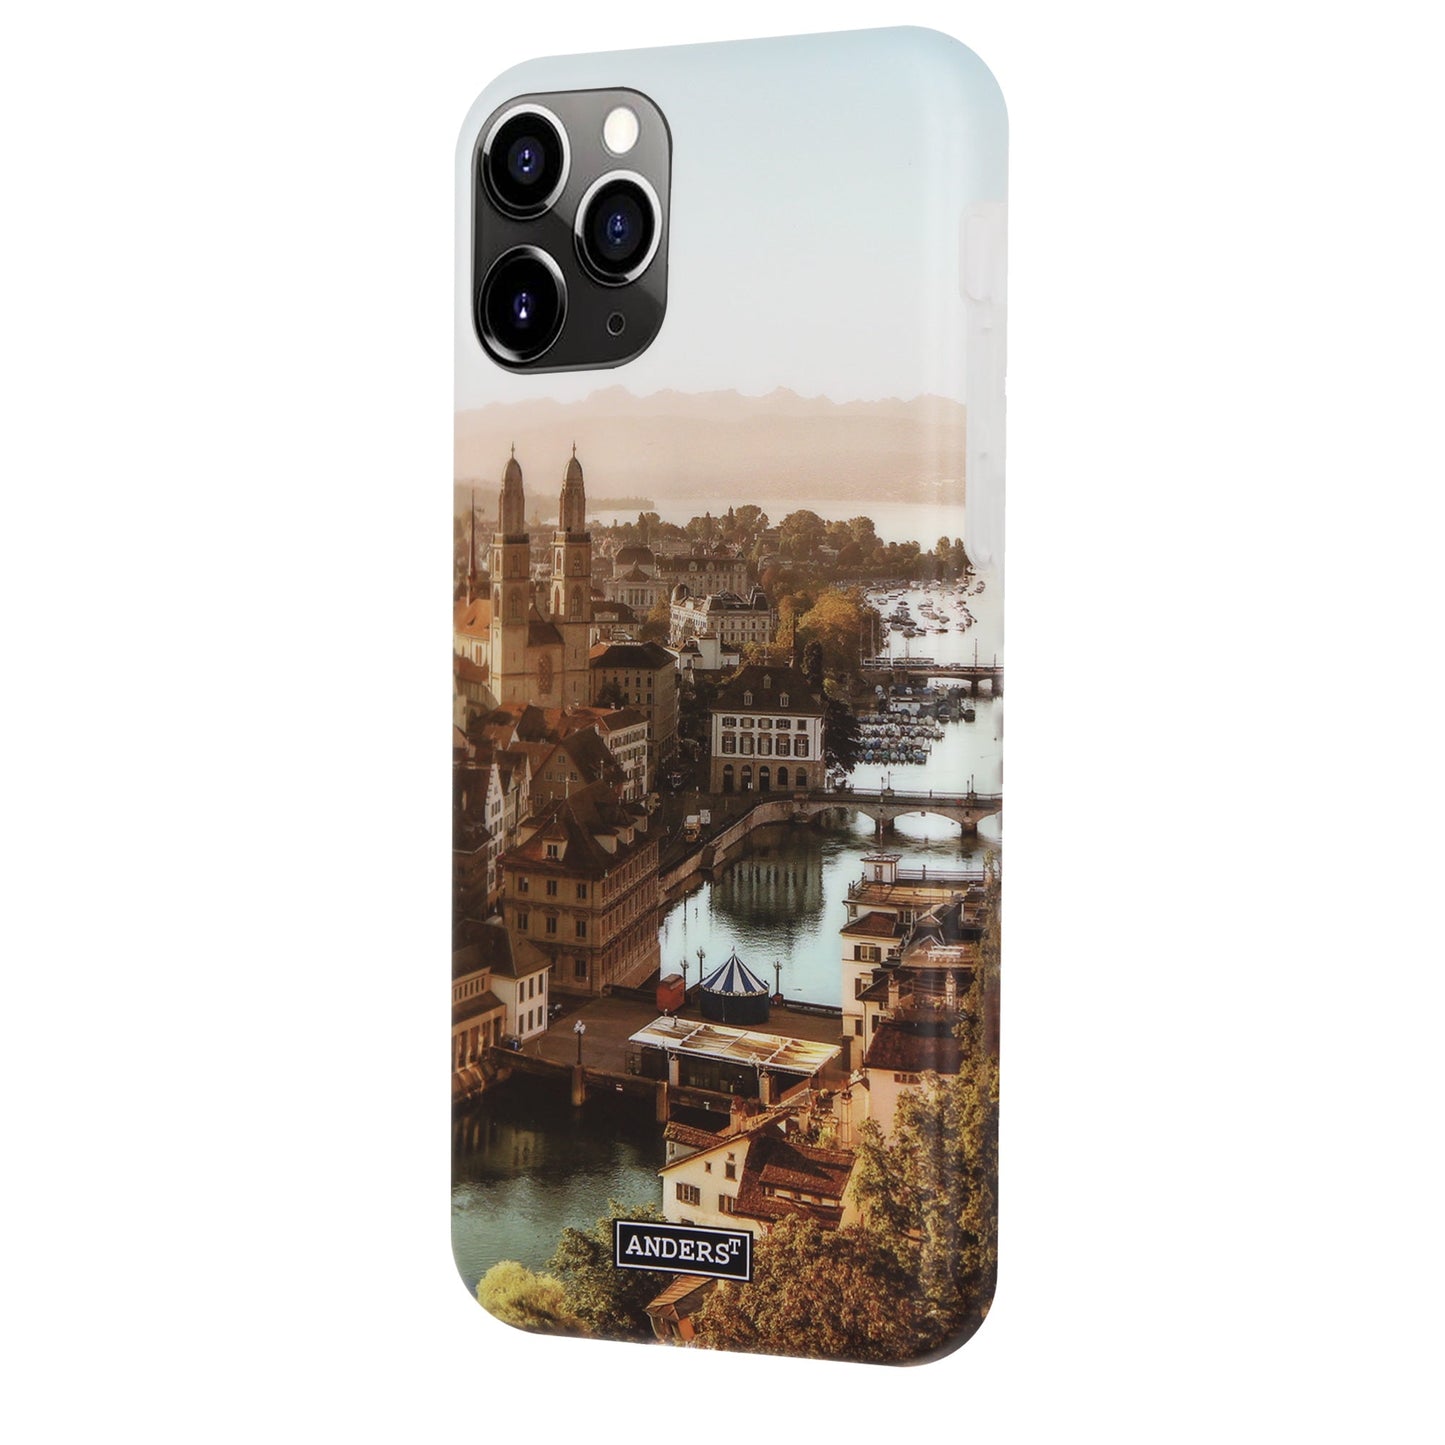 Zurich City from Above 360° Case for iPhone 11 Pro Max